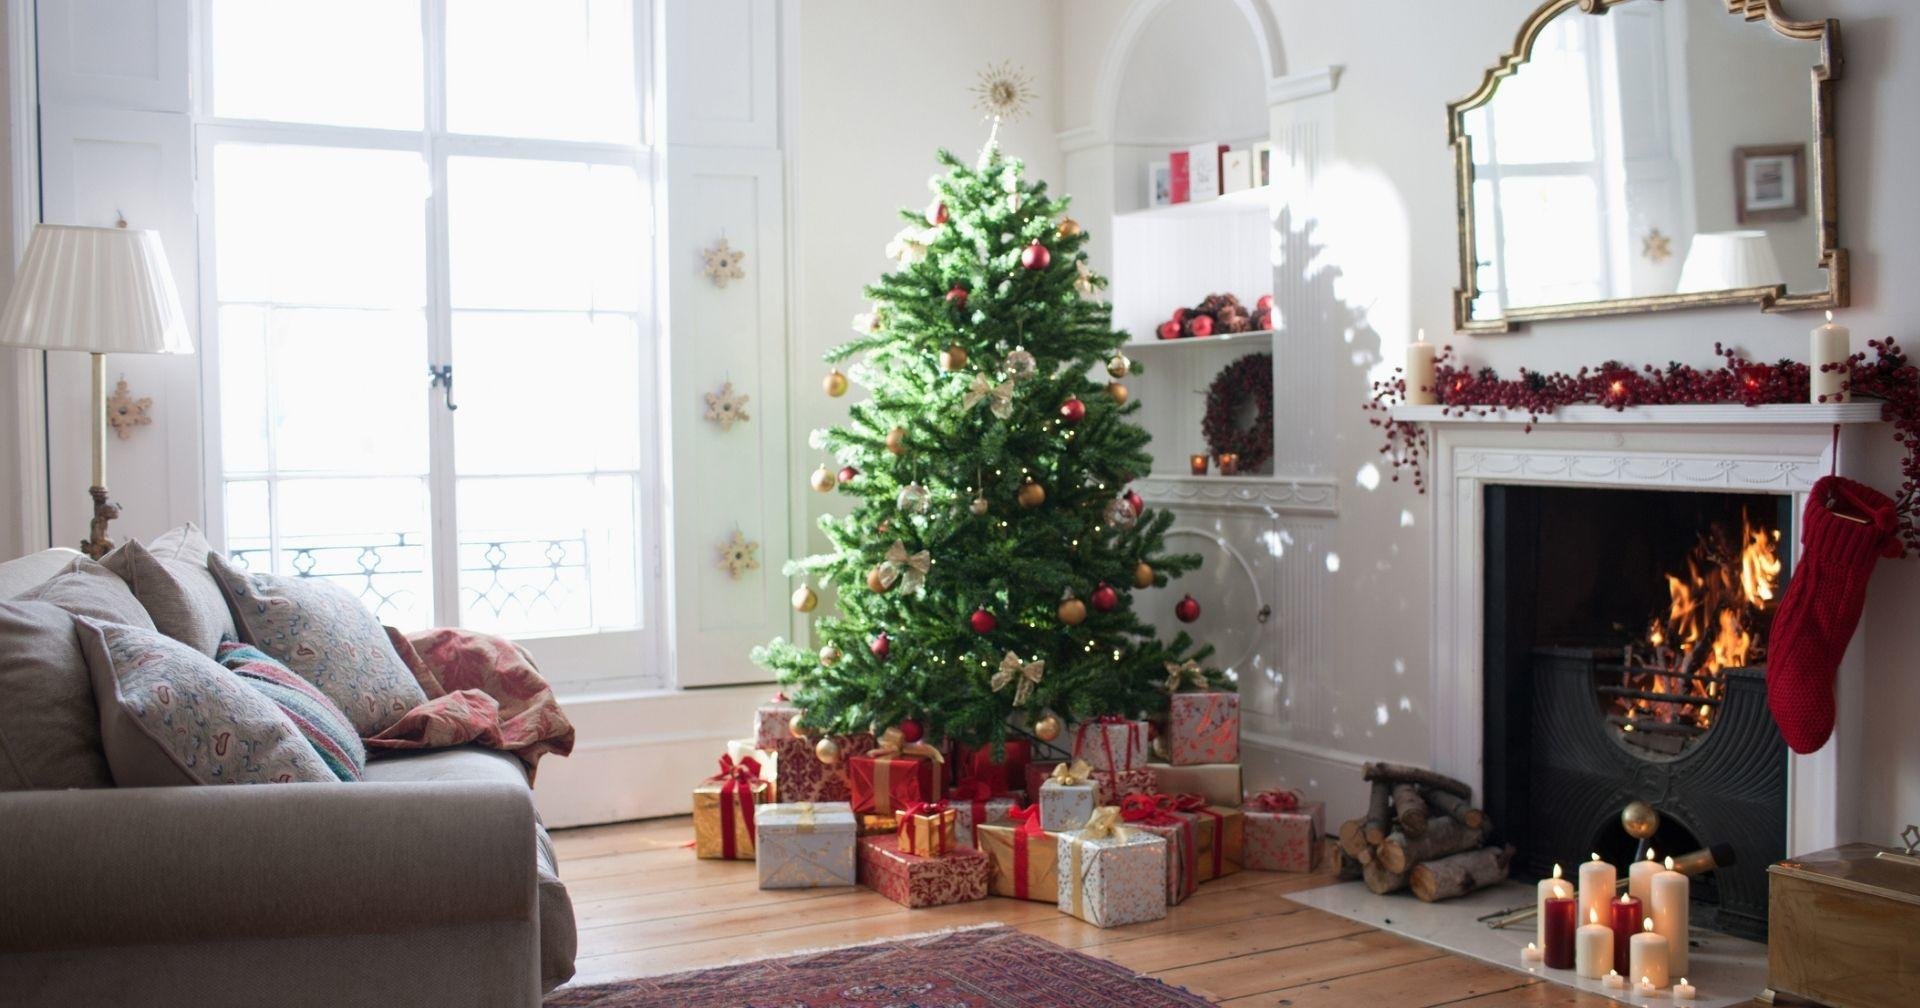 The 10 Most Beautiful Artificial Christmas Trees Under $100